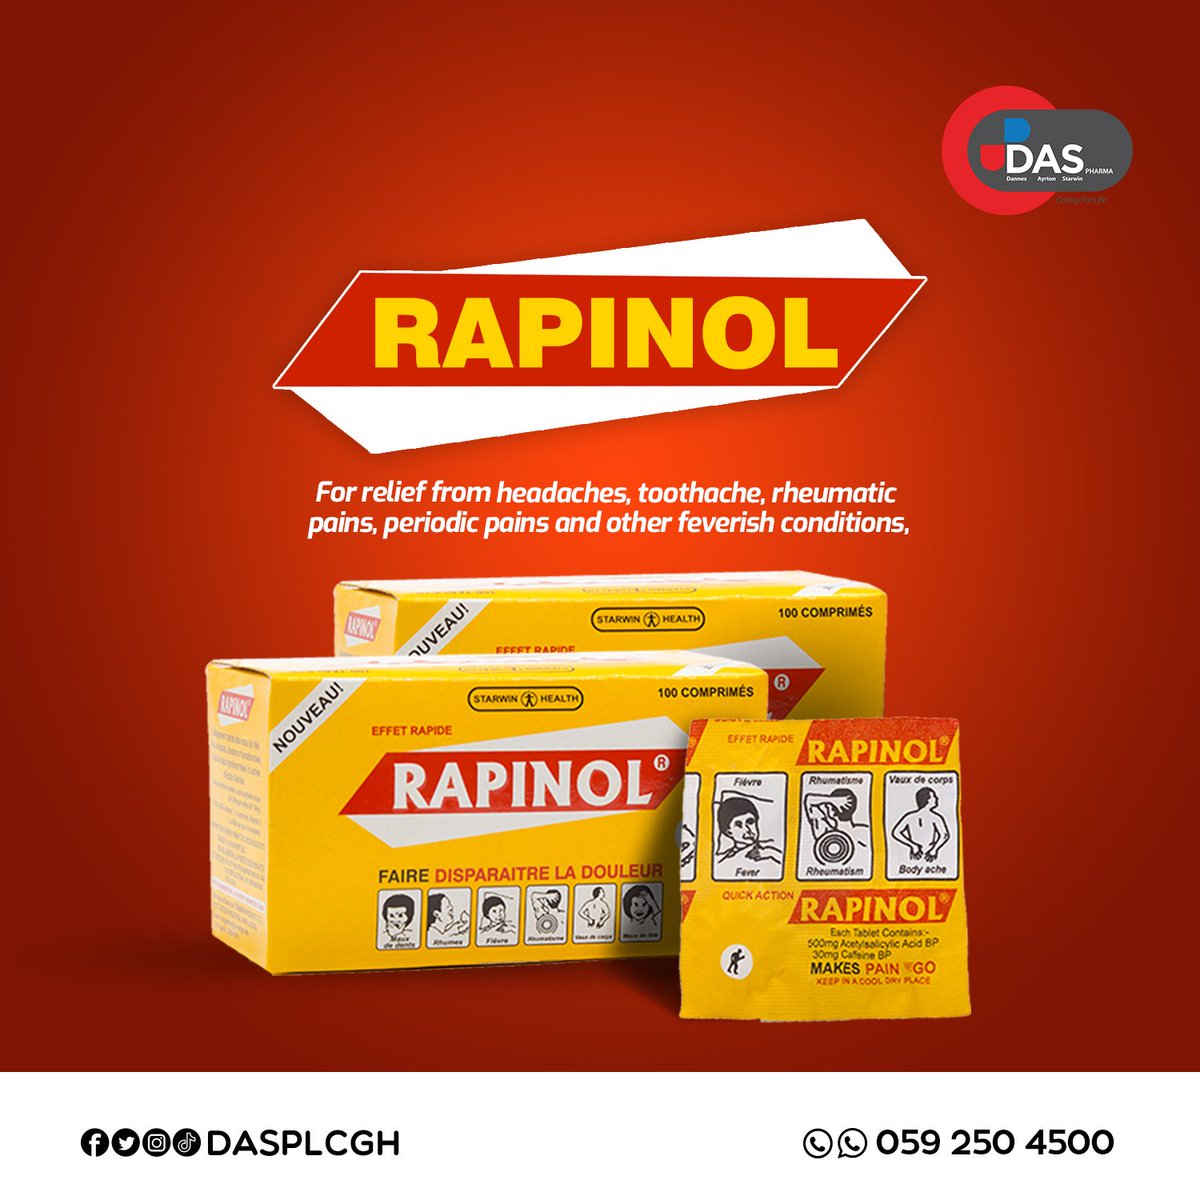 Rapinol provides relief from headaches, toothaches, rheumatic pains, periodic pains and other feverish conditions. Available in pharmacies and over the counter medicine sellers in Ghana.
#DannexAyrtonStarwinPLC
#CaringForLife